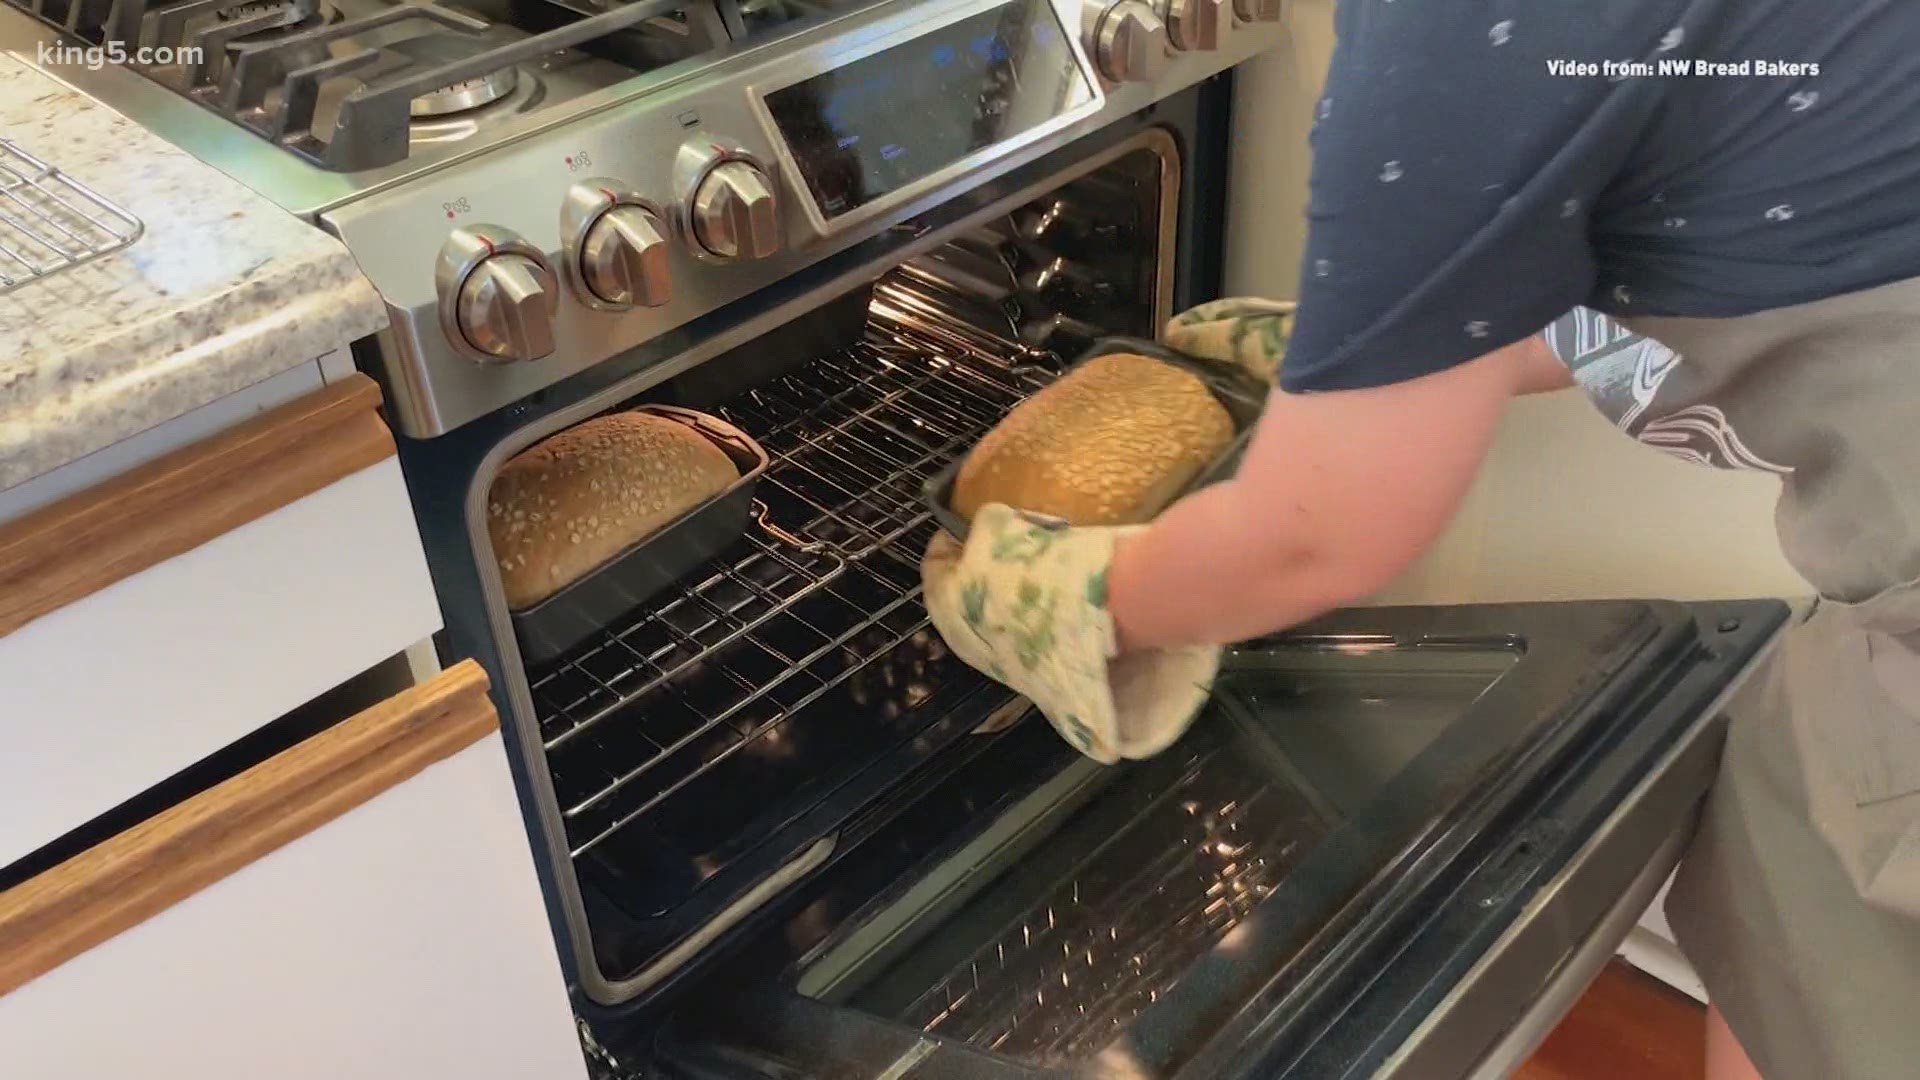 About 95 home bakers have teamed up to bake bread for distribution at Puget Sound-area food pantries. They ramped up their efforts in the coronavirus crisis.